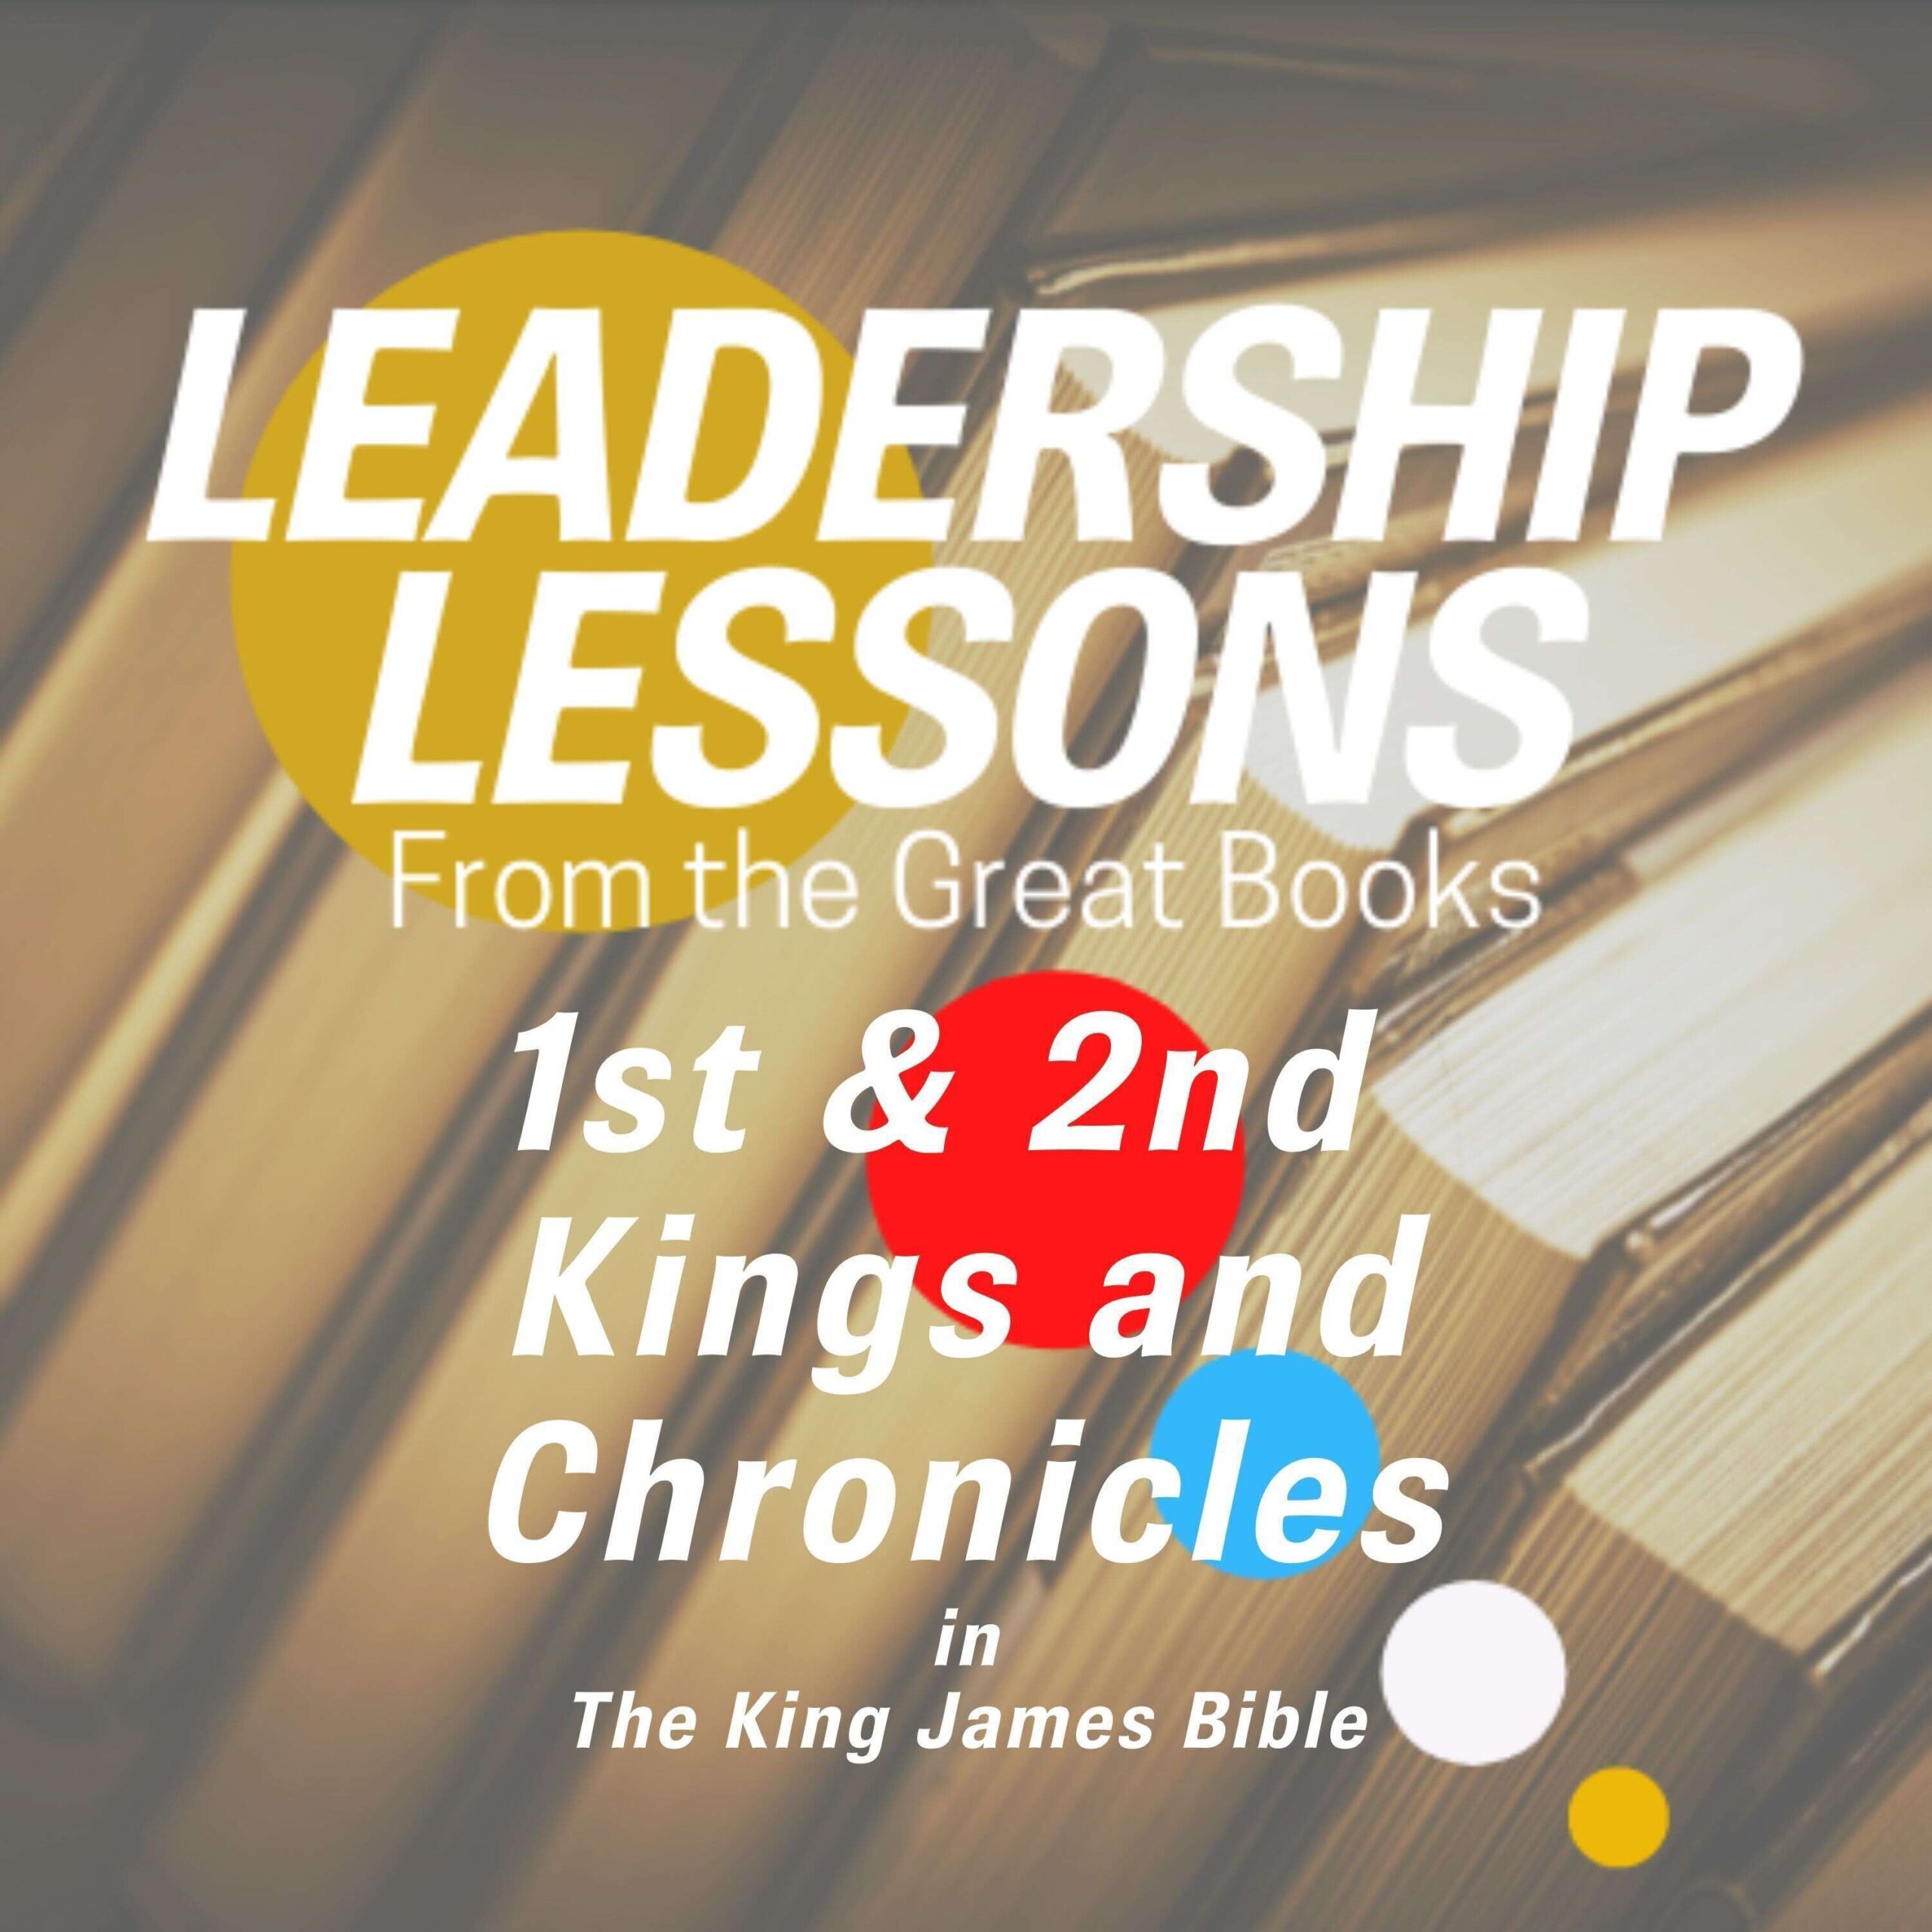 1 & 2 and Chronicles 1 & 2, King James Bible w/ Pastor Brian Bagley